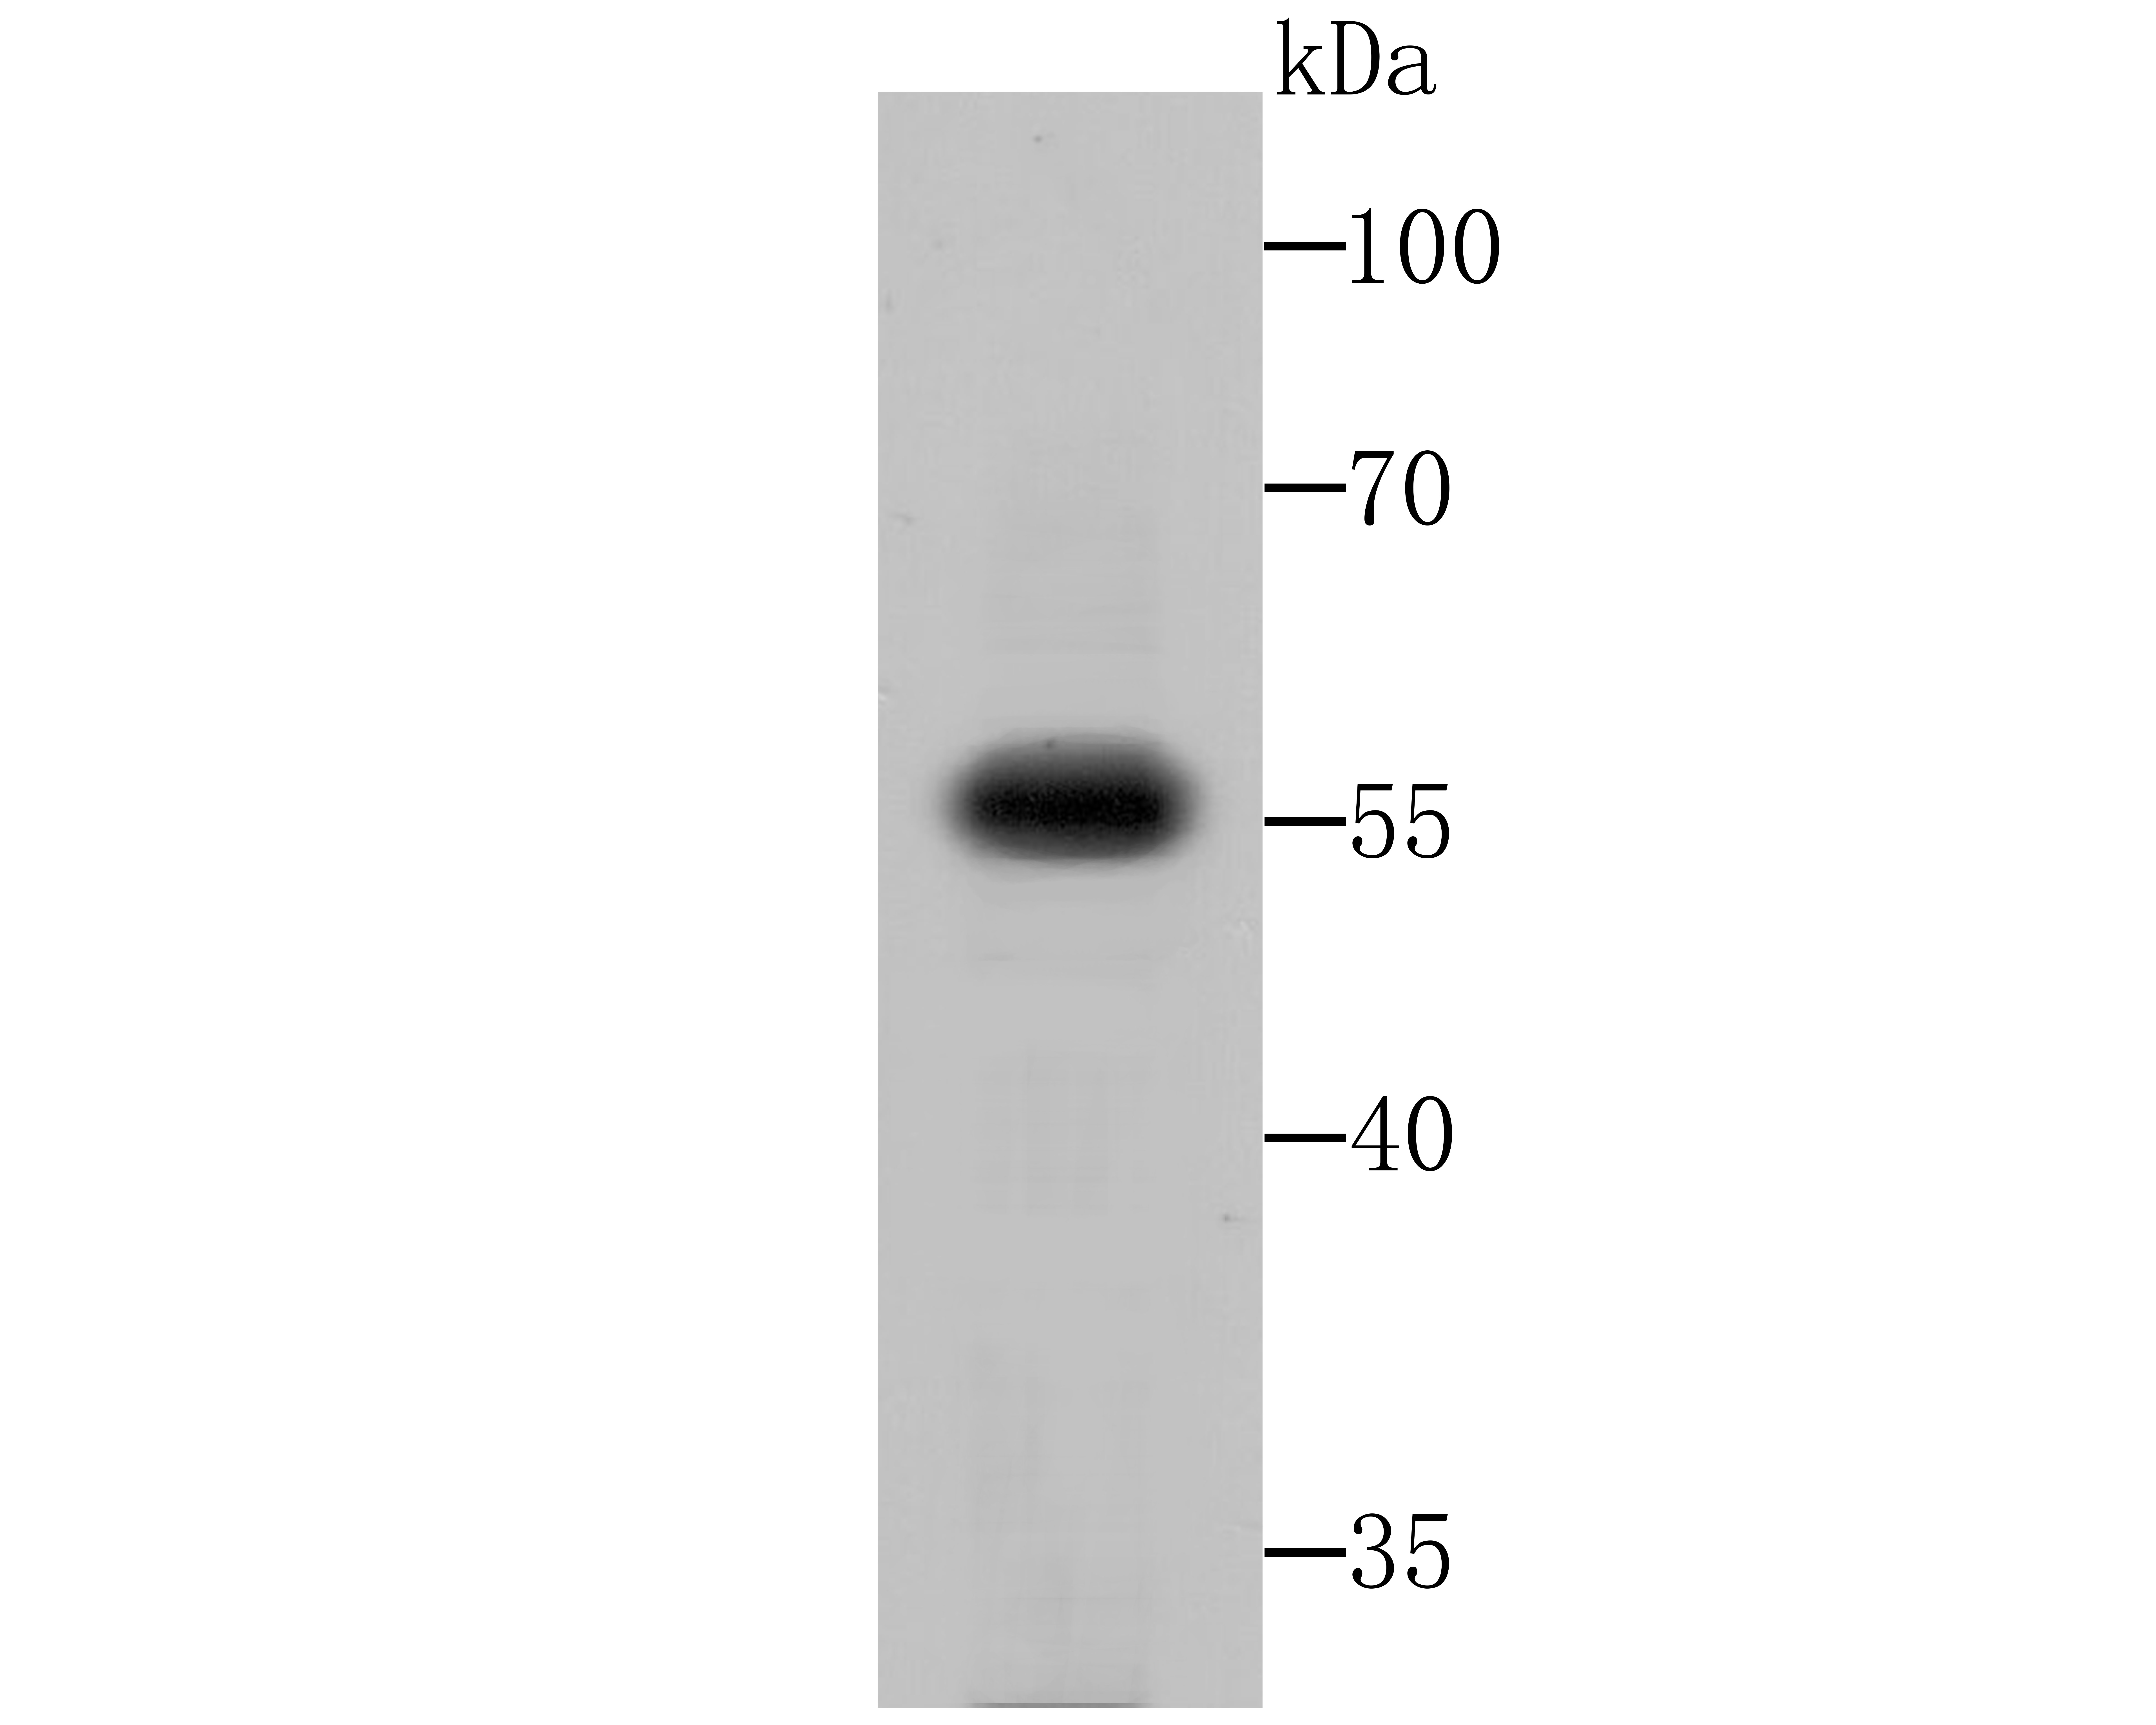 Western blot analysis of Fusion glycoprotein F0 on Fusion glycoprotein F0 transfected HEK293 cell lysates using anti- Fusion glycoprotein F0 antibody at 1/500 dilution.